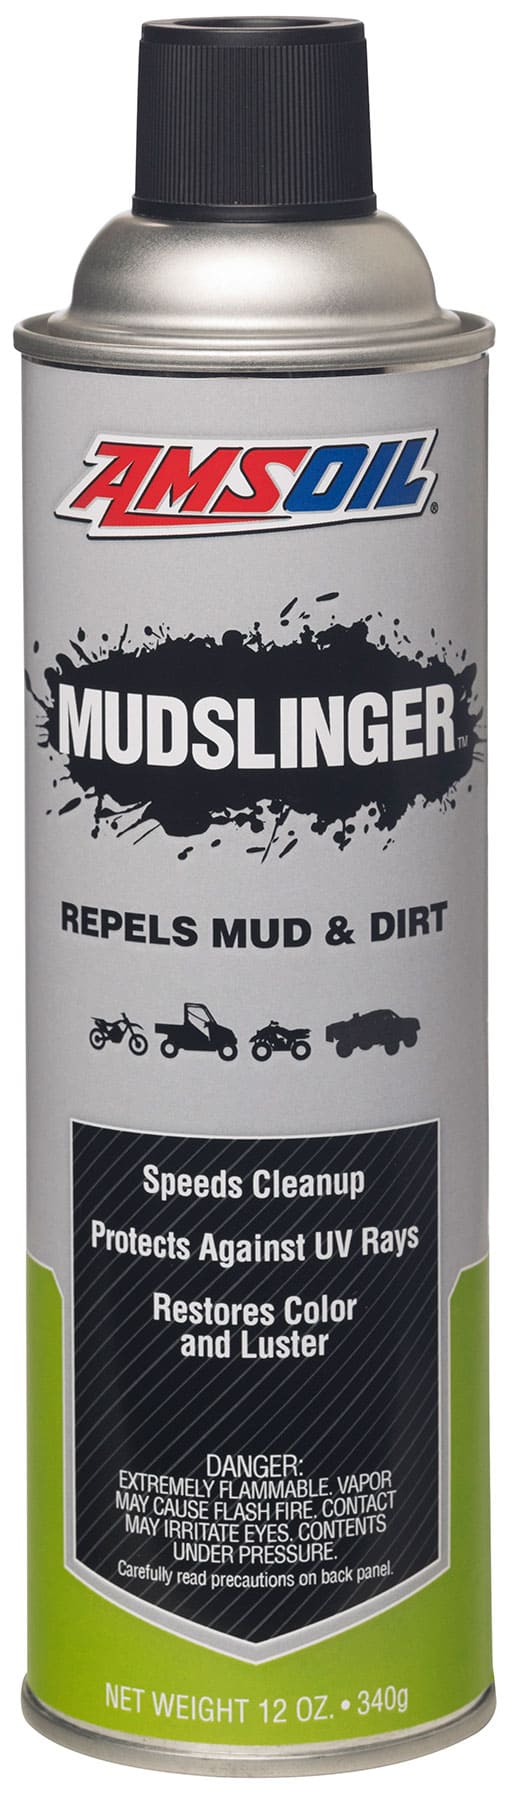 A can of AMSOIL Mudslinger (AMS), designed to provide a protective, non-stick layer of armor against the accumulation of mud, dirt and snow on ATVs, UTVs and dirt bikes.